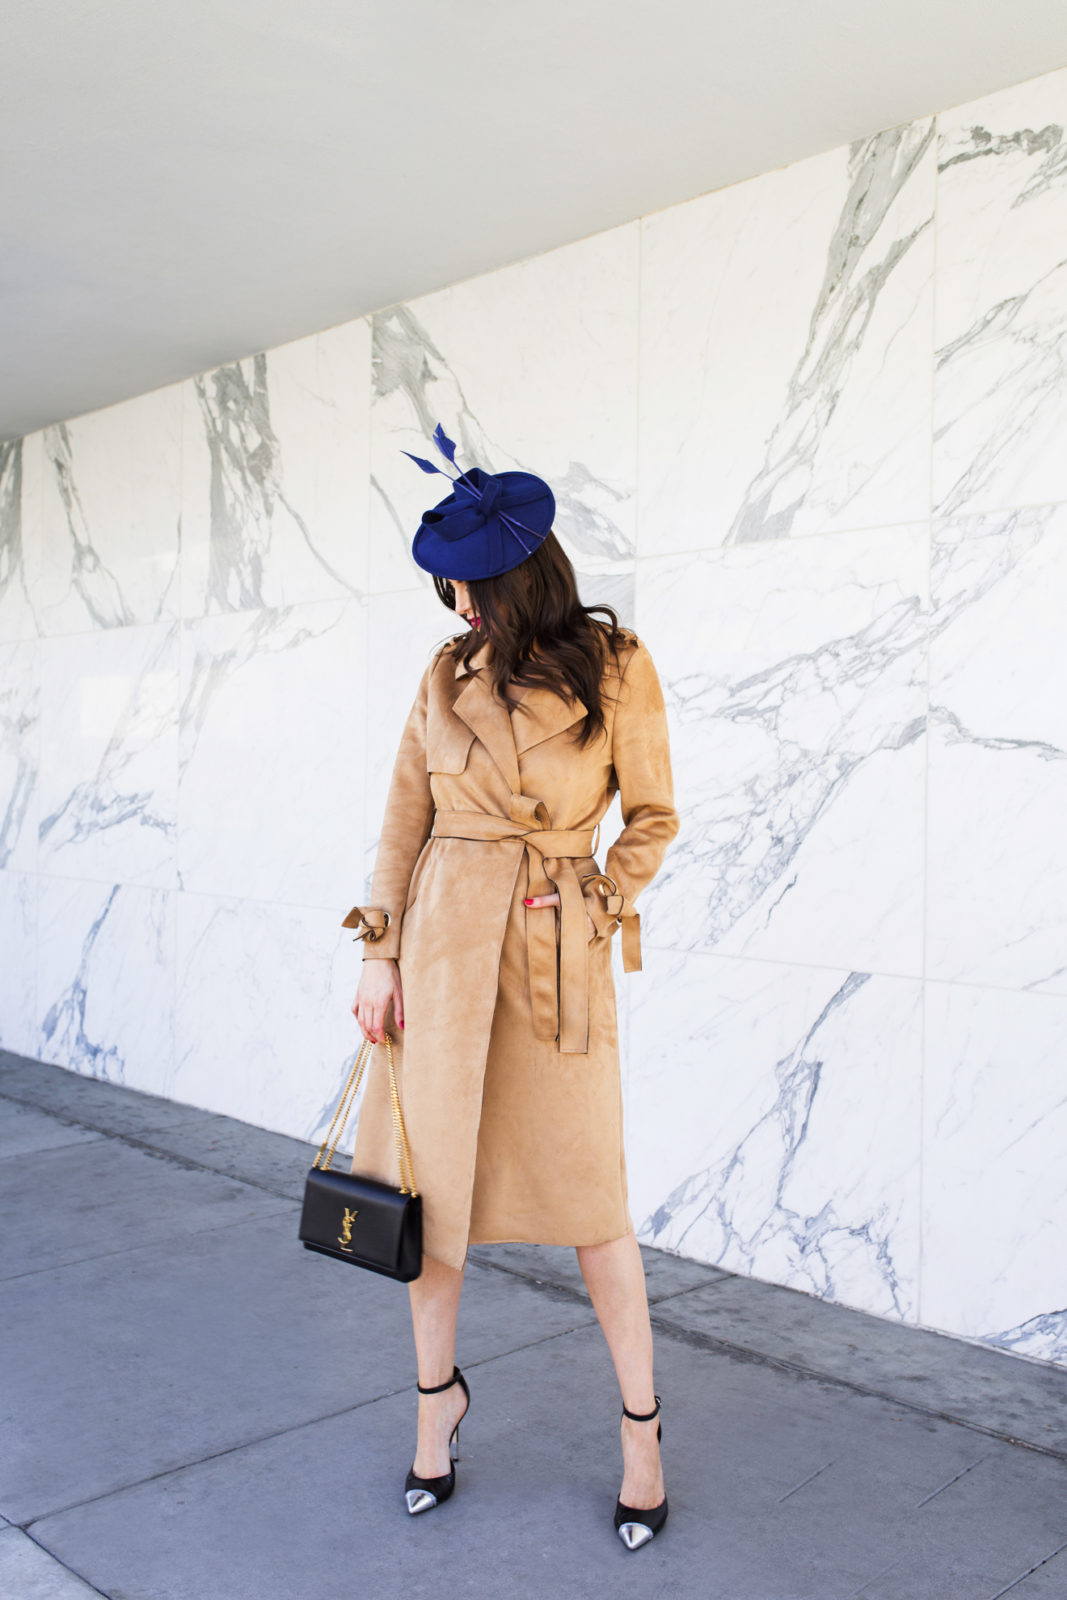 Give Me All The Best Fascinators - Fashion | Laura Lily